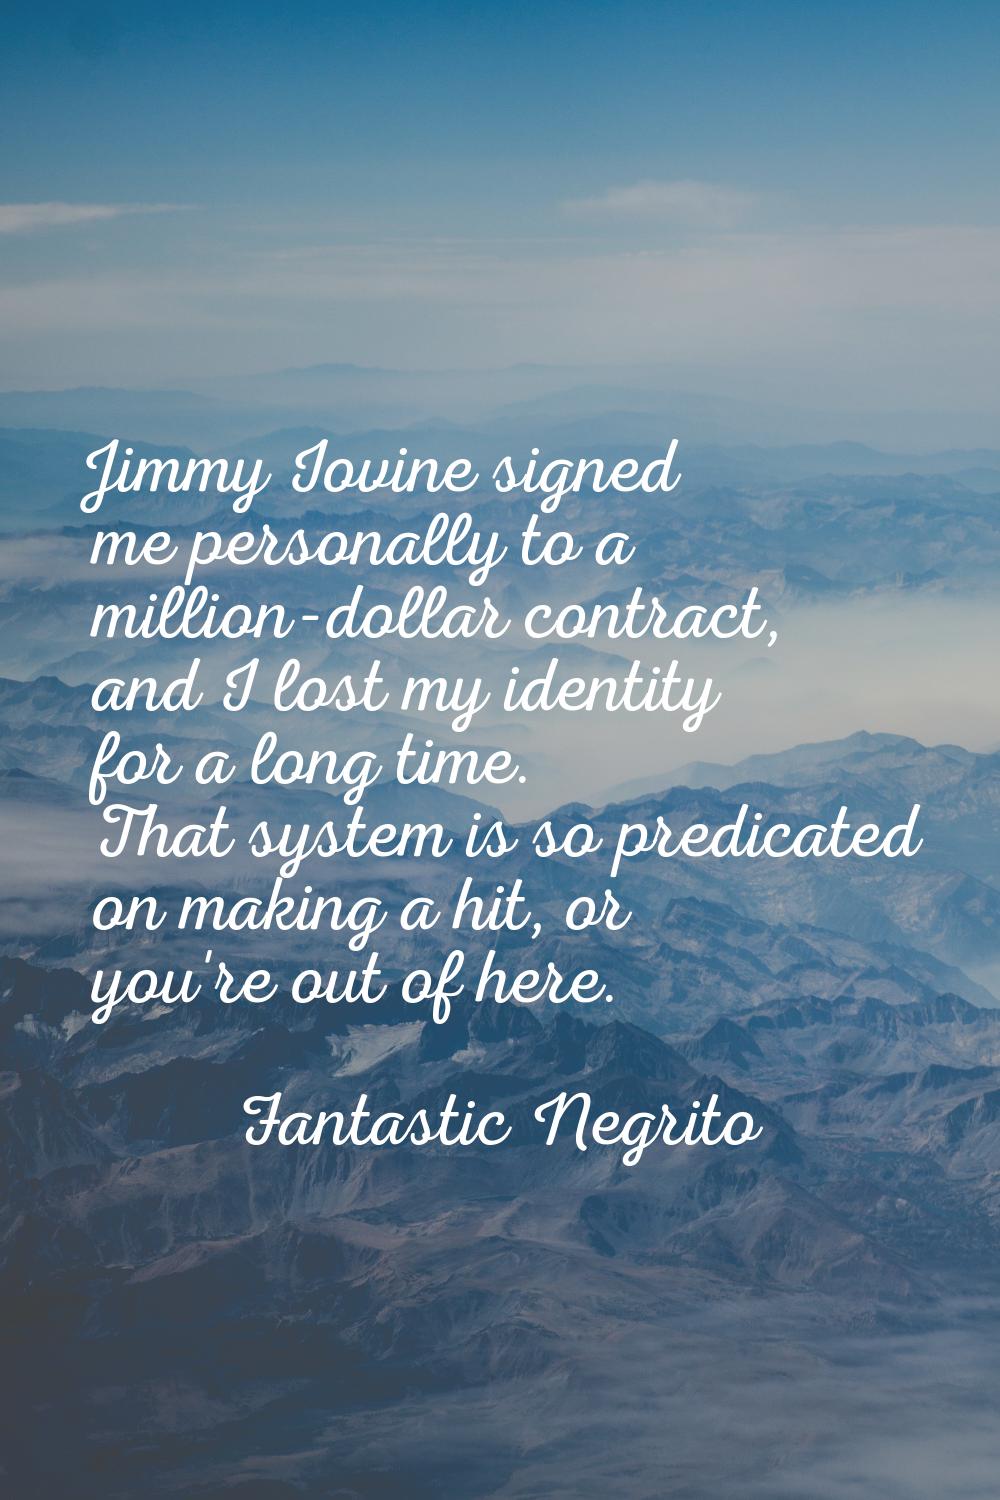 Jimmy Iovine signed me personally to a million-dollar contract, and I lost my identity for a long t